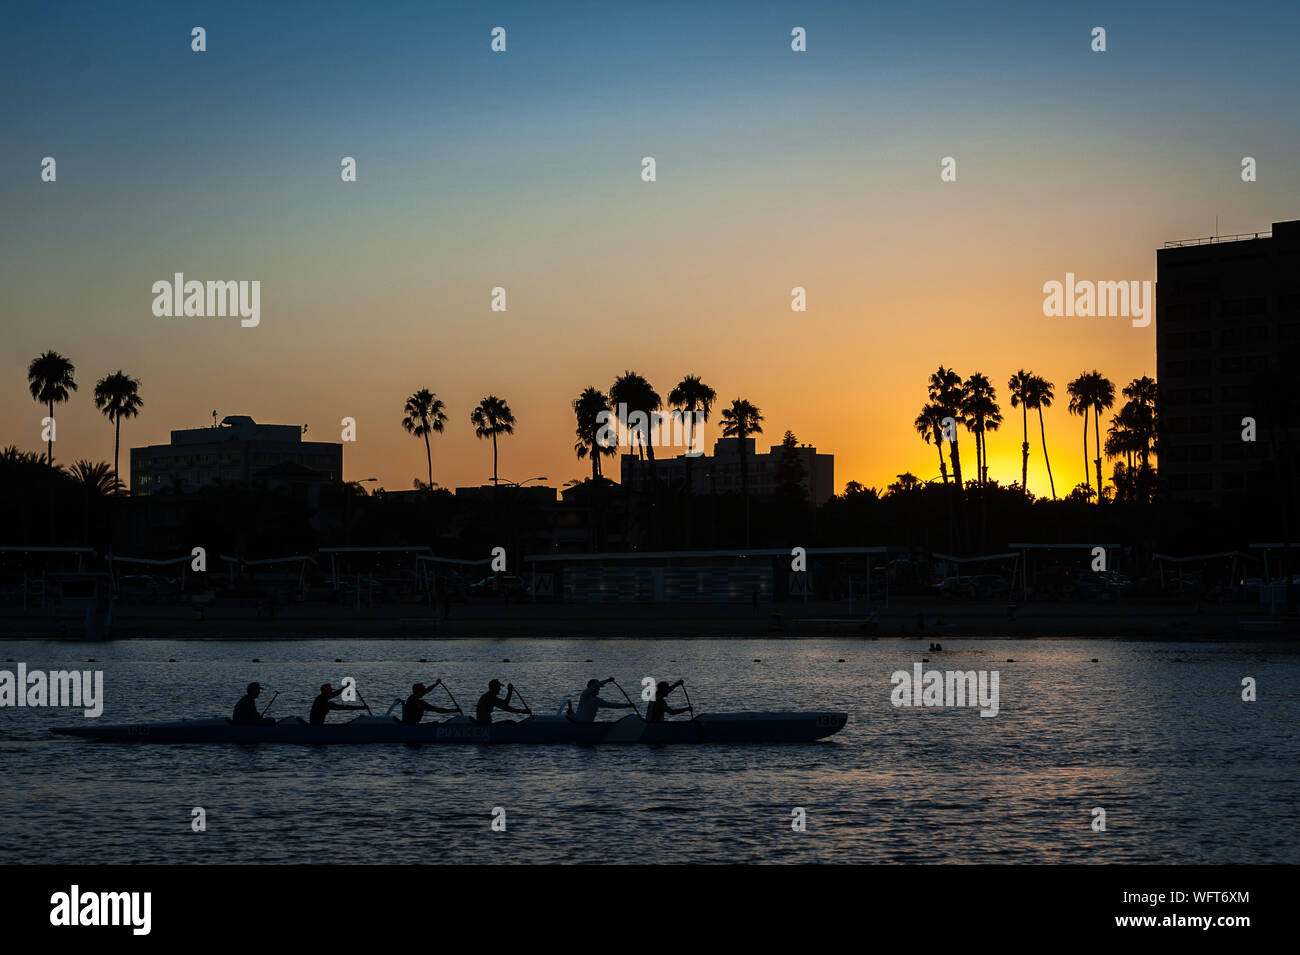 Silhouette of a group paddling an outrigger canoe during sunset in the Marina Del Rey harbor in Los Angeles, CA. Stock Photo